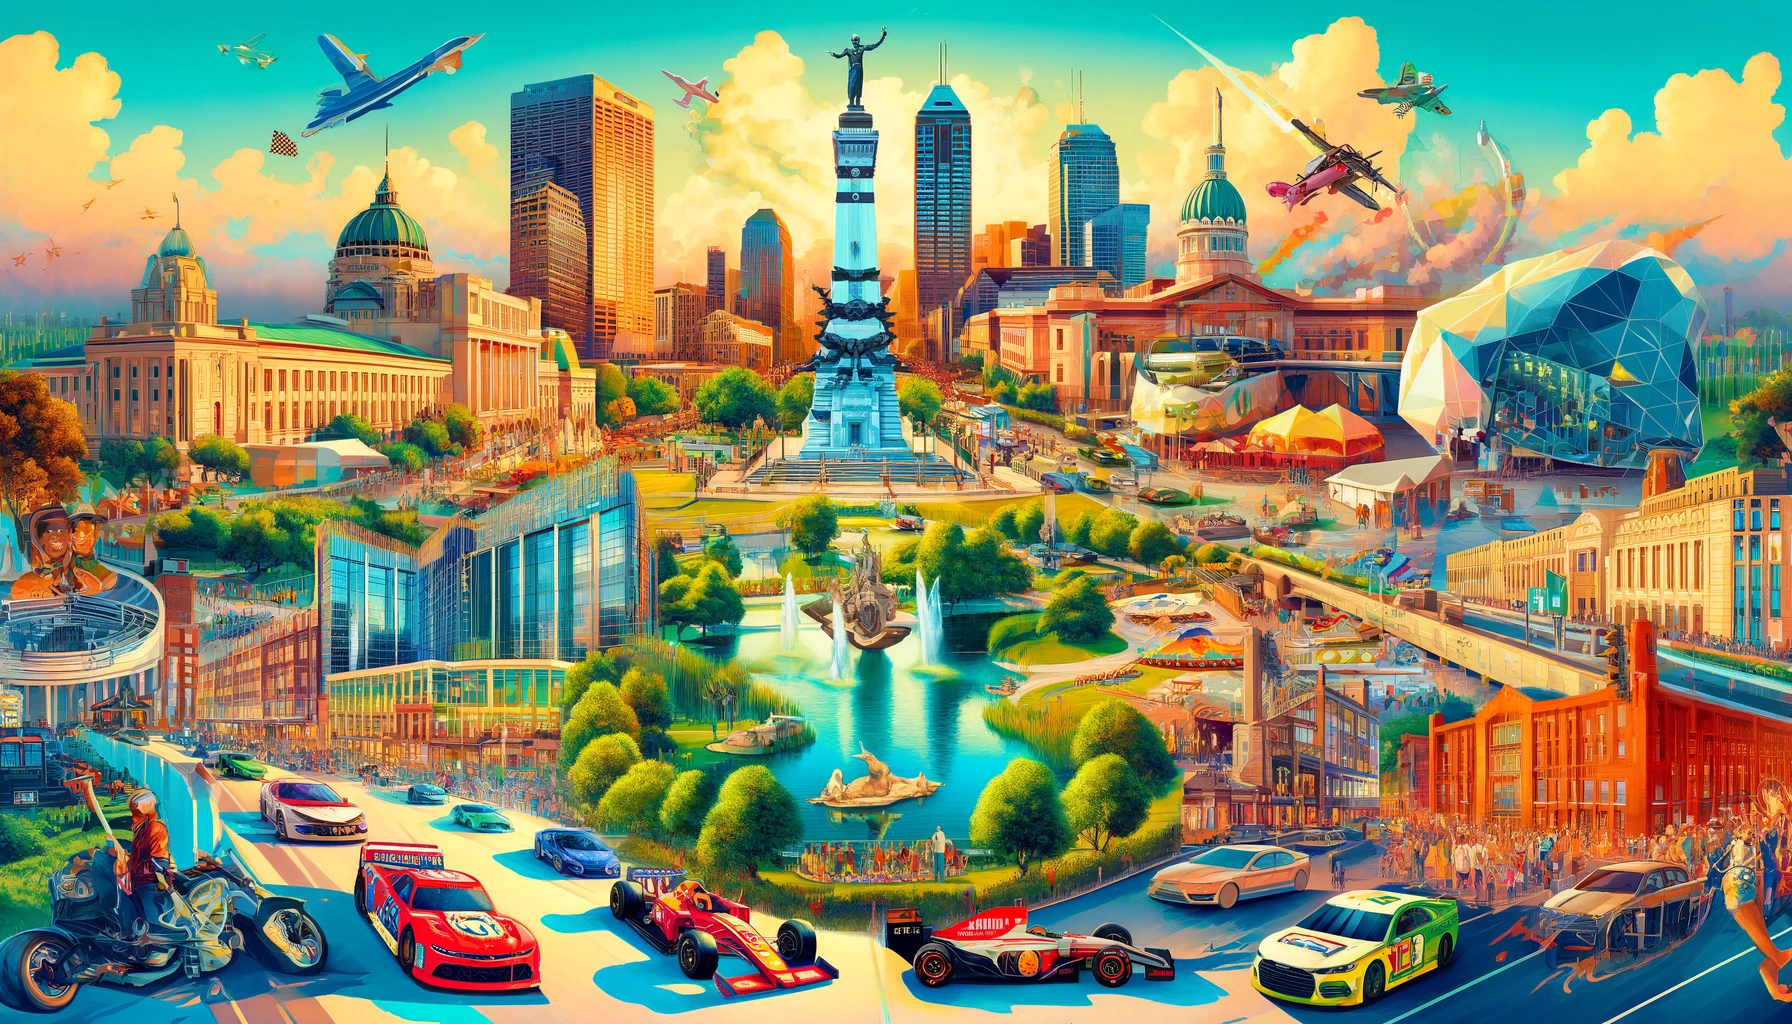 A vibrant collage of top attractions and activities in Indianapolis, featuring landmarks, parks, museums, and the city skyline.